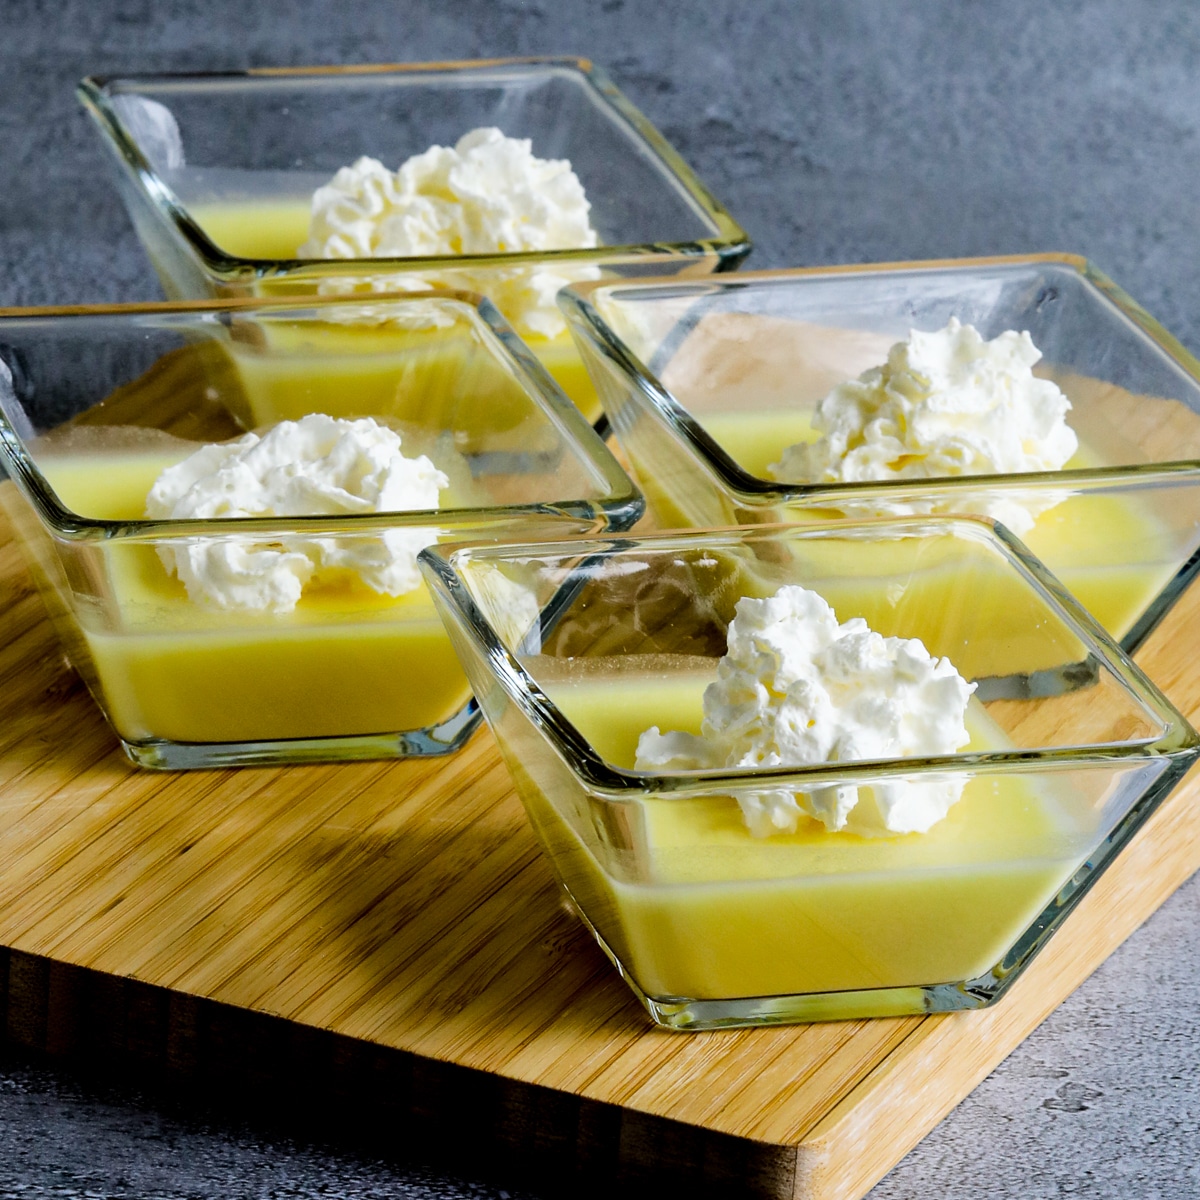 Square image for Sugar-Free Jelled Ricotta Pudding shown in four square dishes on cutting board, with whipped cream.